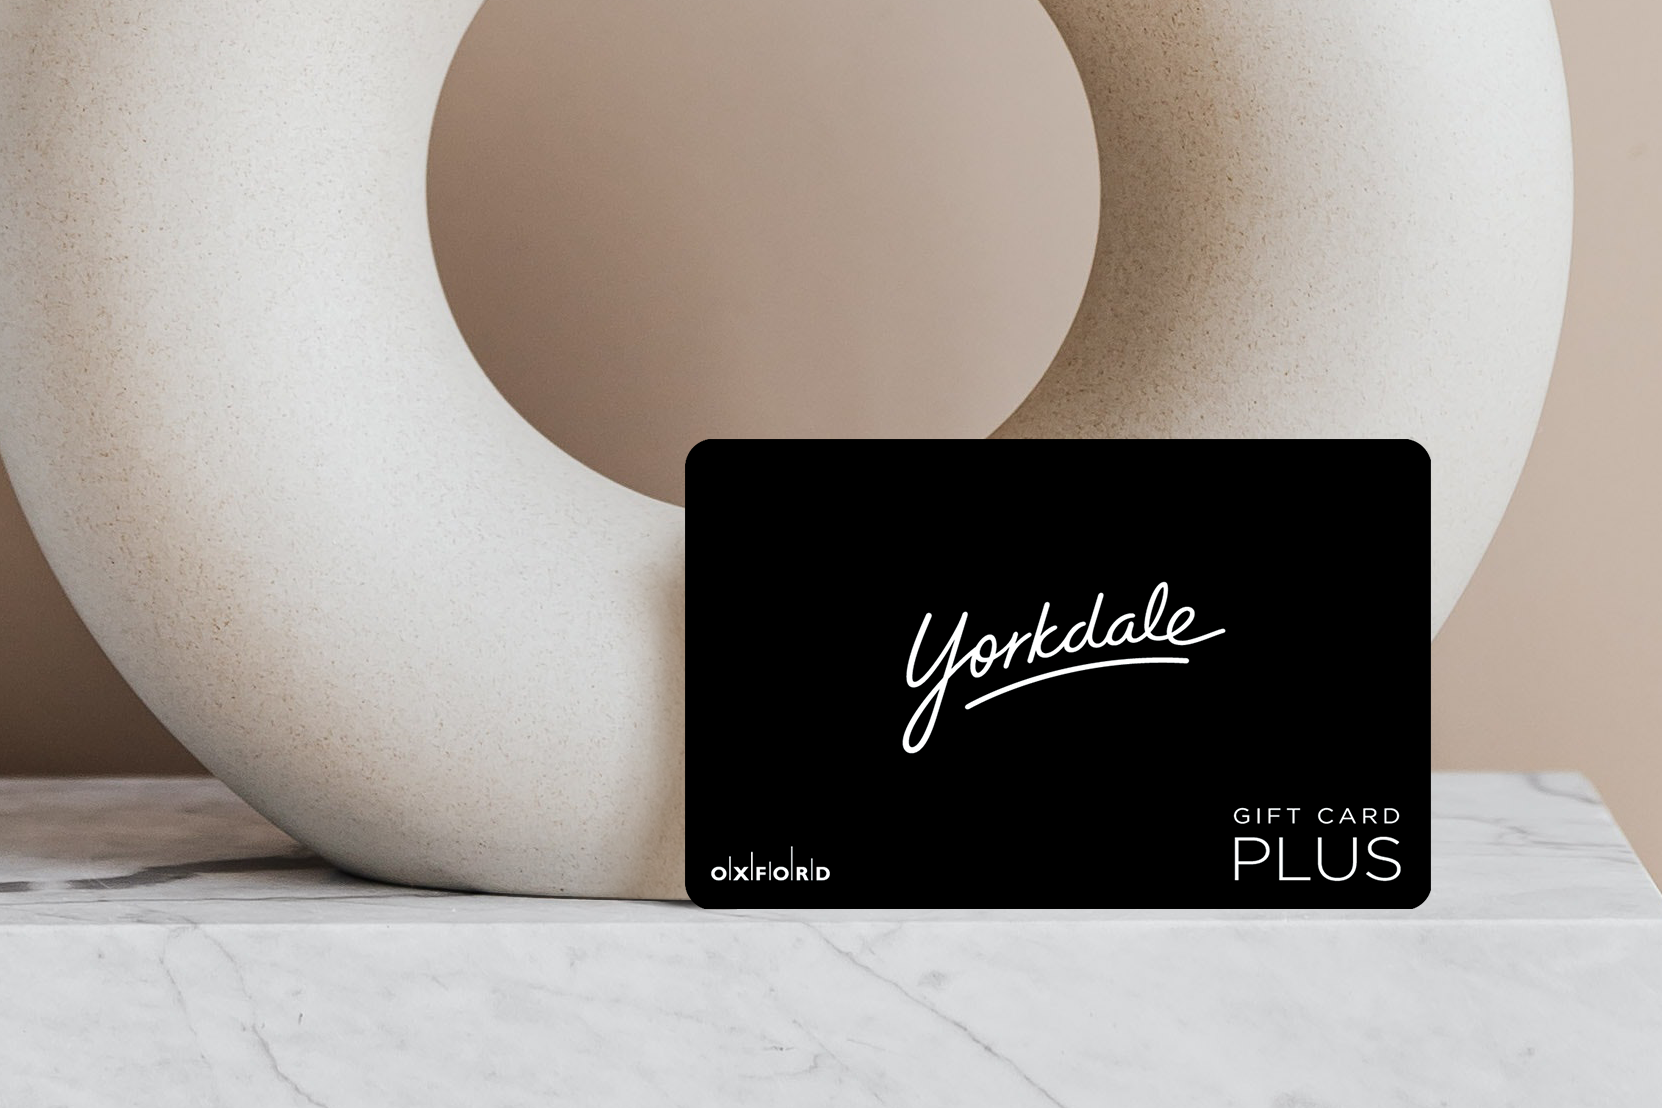 promotional image of a black yorkdale gift card sitting in front of a round ceramic white vase